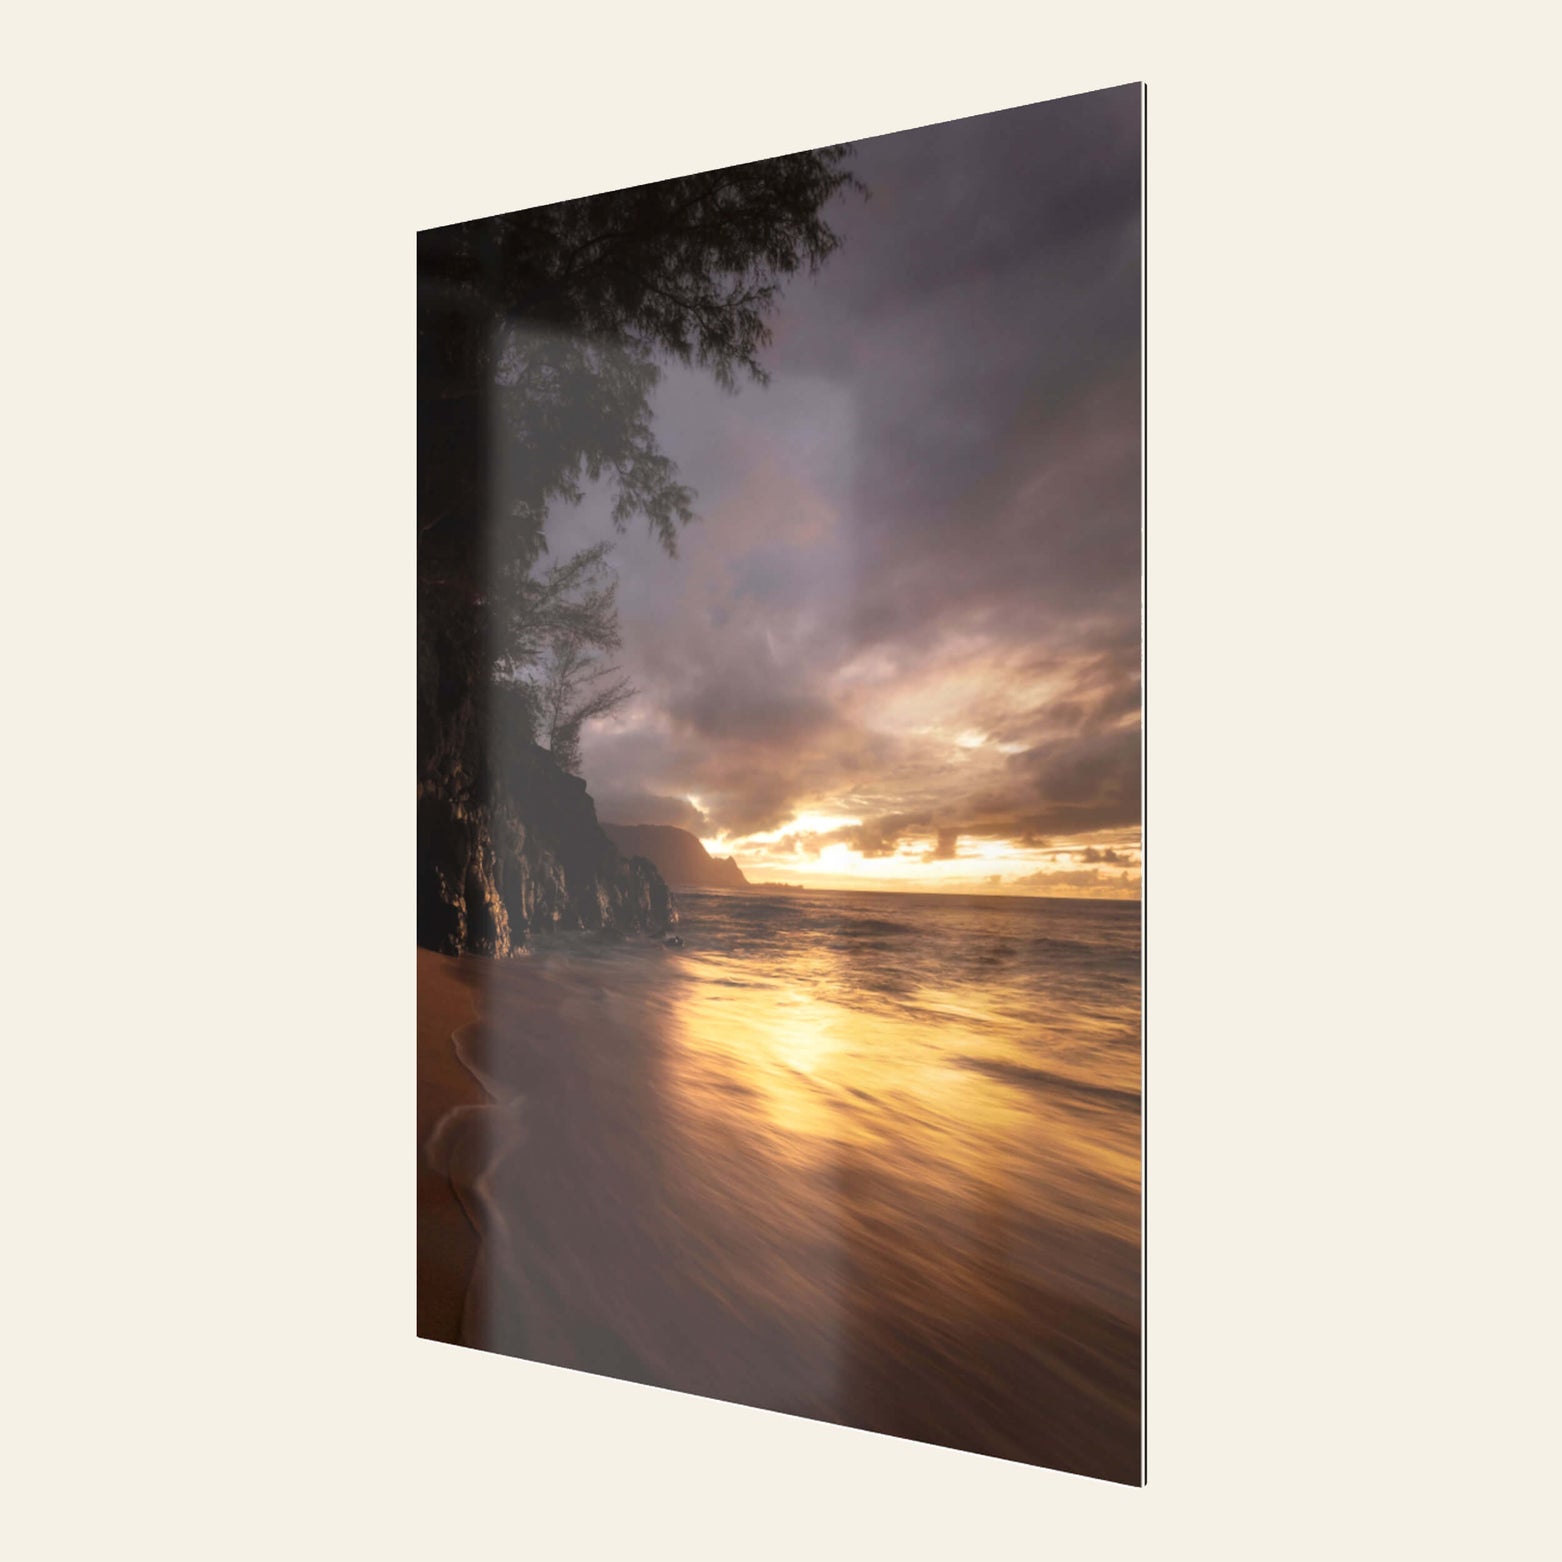 A Hideaway Beach picture from one of the best beaches on Kauai hangs in a living room.